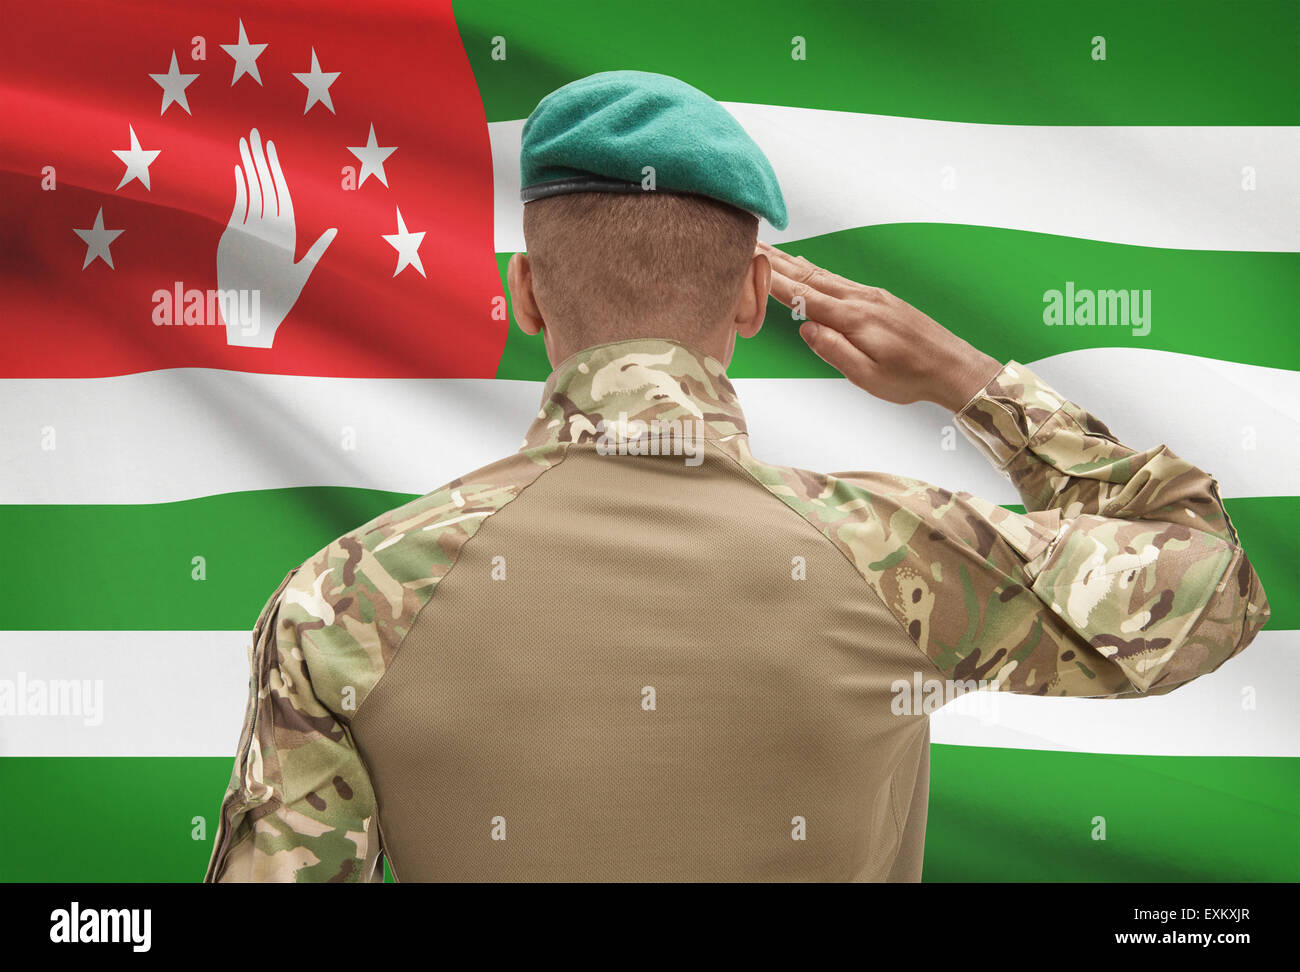 Soldier Wearing an Uniform with Indian National Flag Stock Image